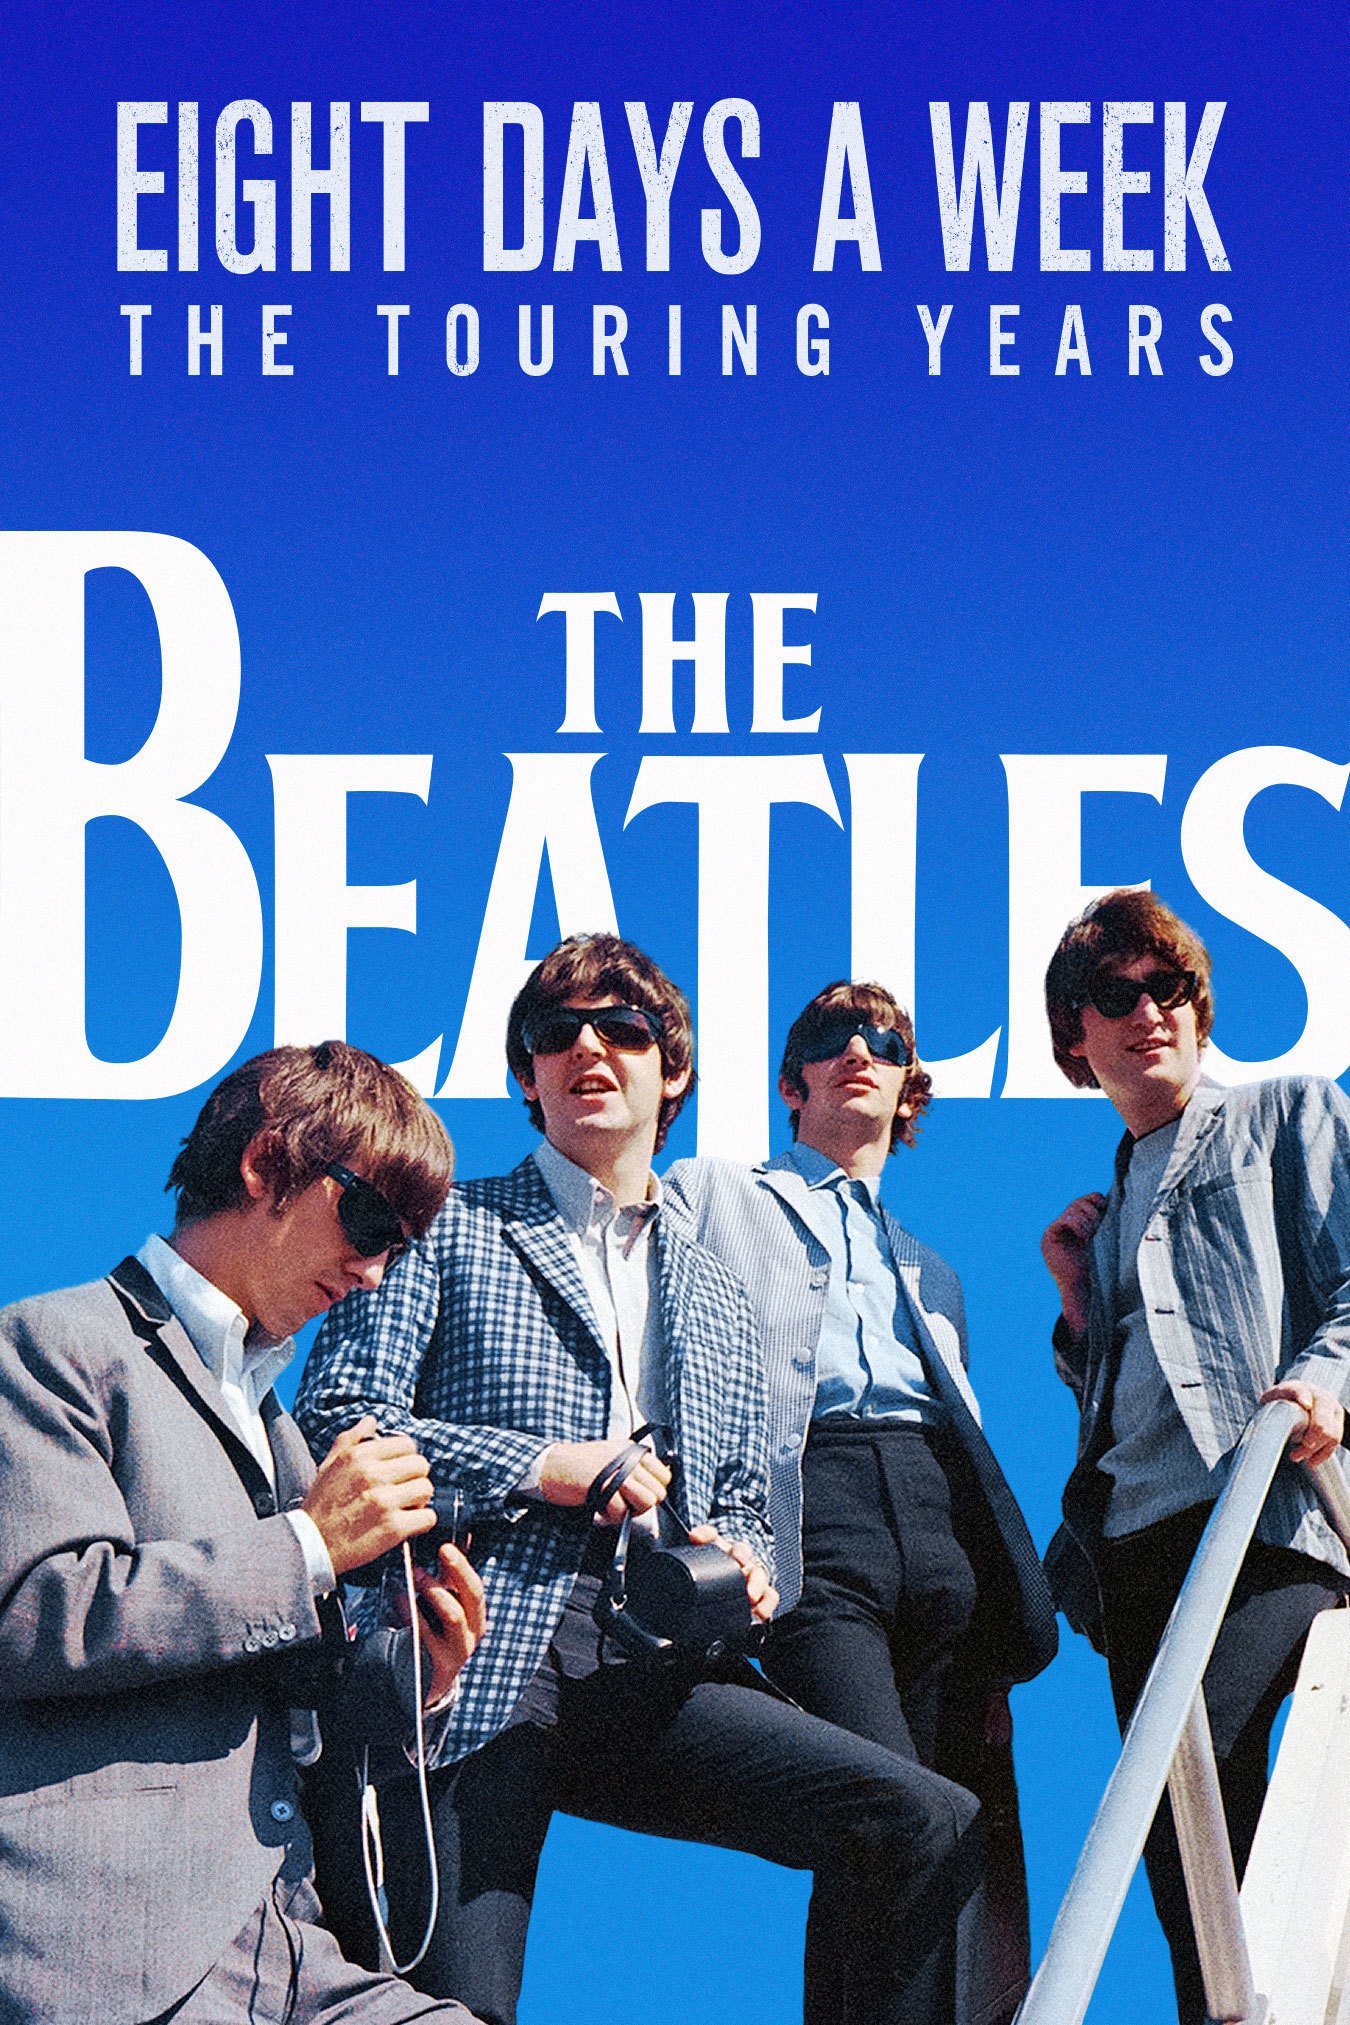 Poster de la película "The Beatles: Eight Days a Week - The Touring Years"